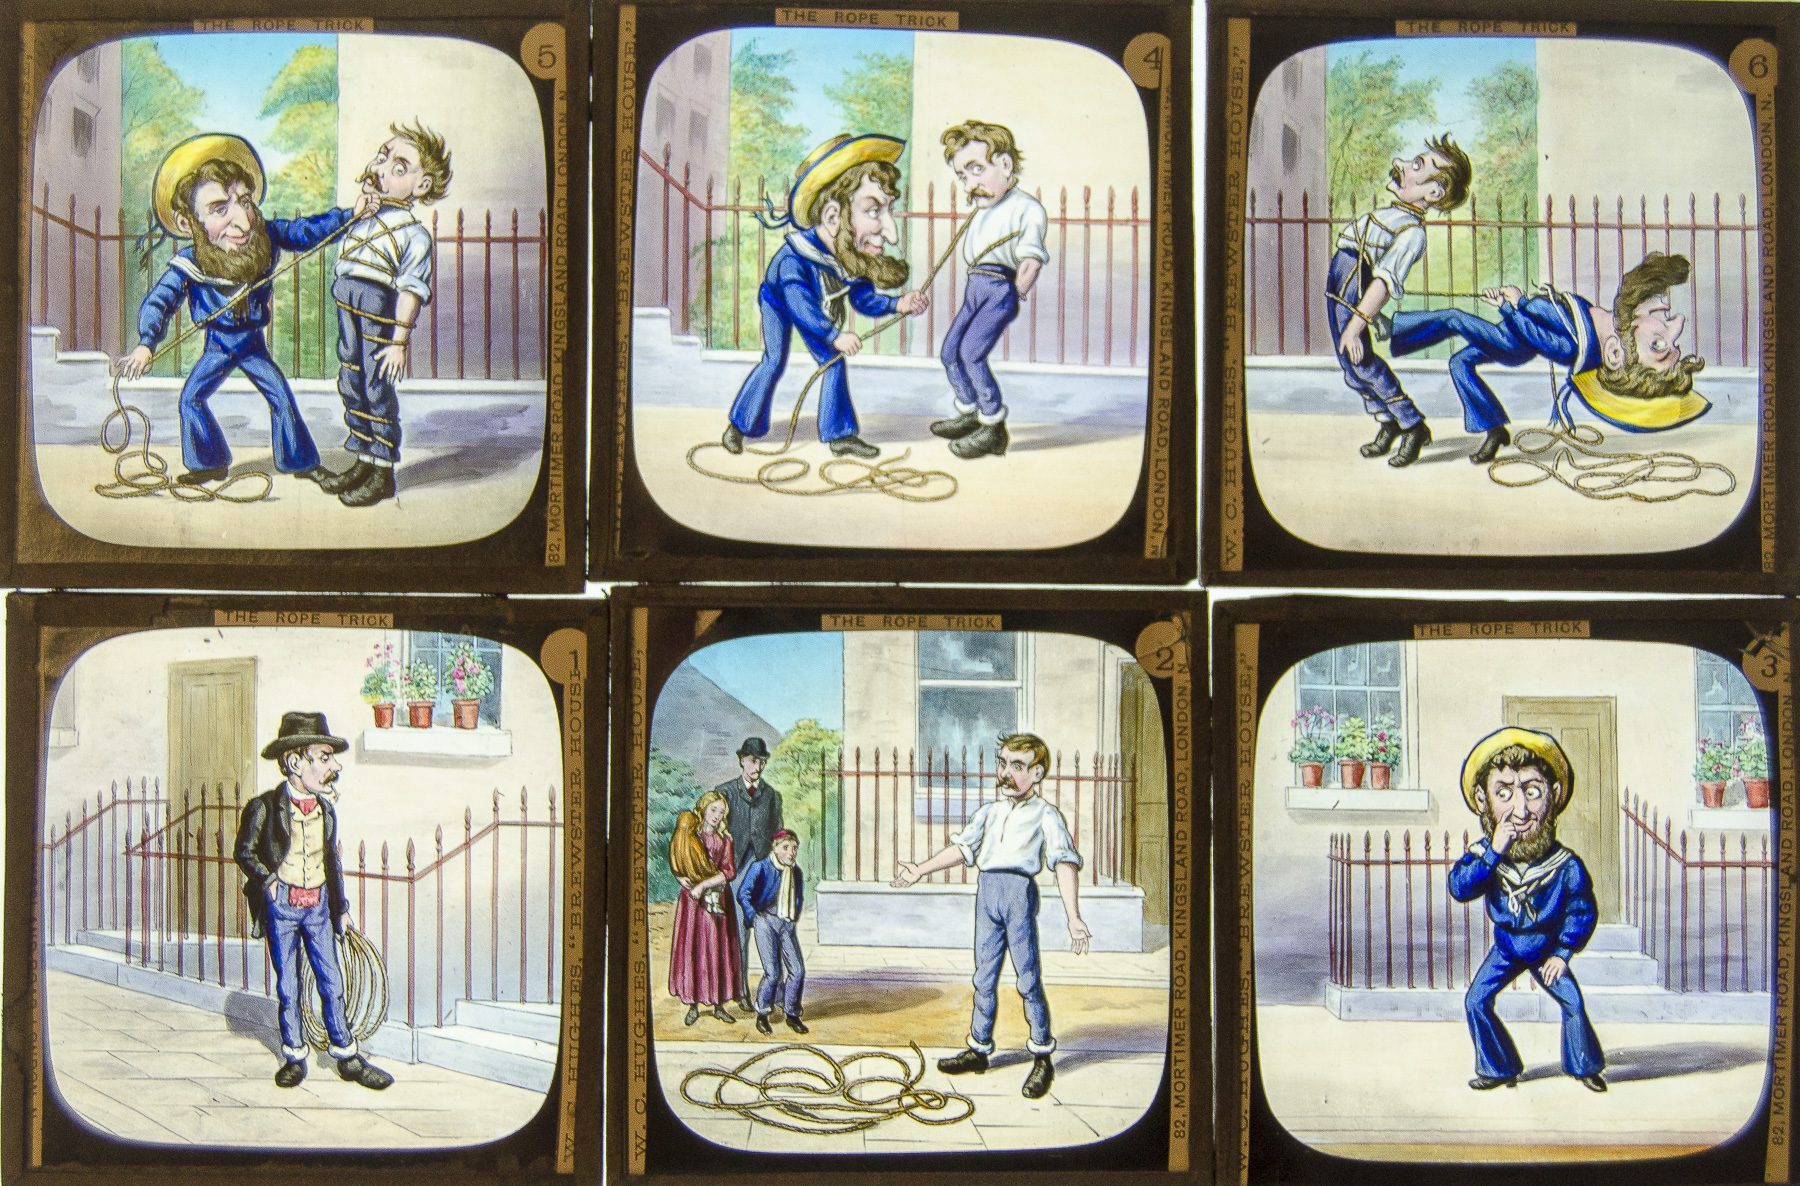 Four Magic Lantern Slide Stories, Two Ducks and a Frog - 12 coloured slides; The Rope Trick - 9